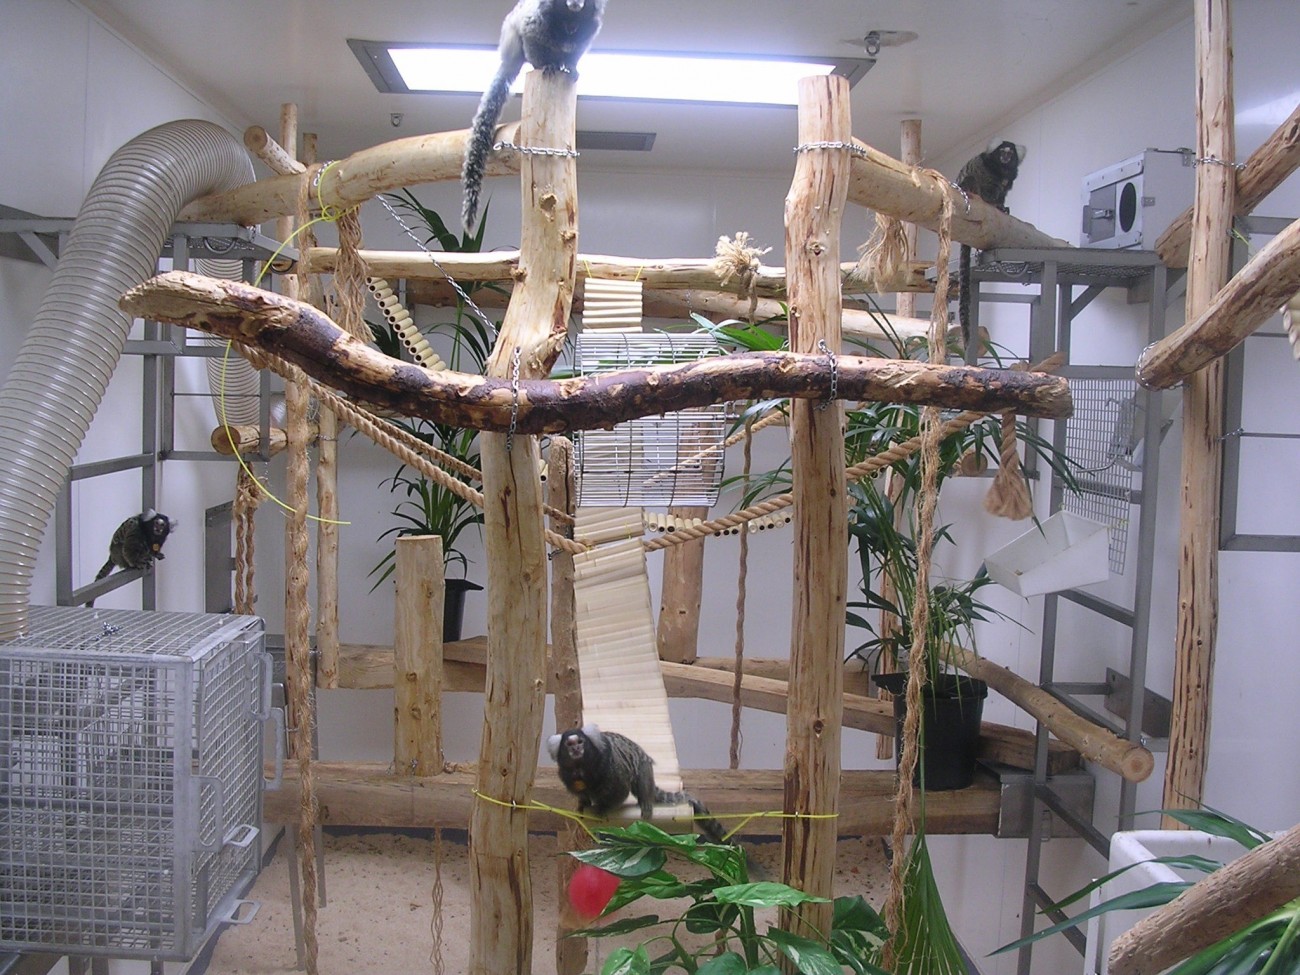 A family group of common marmosets housed in a laboratory room. Four marmosets are perching on wooden branches and metal frames, which fill the available room space. Other enrichment in the room includes suspended ropes and plants. There is artificial lighting in the ceiling and sawdust on the solid floor. On the left hand side is a small mesh cage, used to capture the animals, and also flexible tubing, which gives the monkeys access to an outdoor enclosure on the roof of the laboratory.